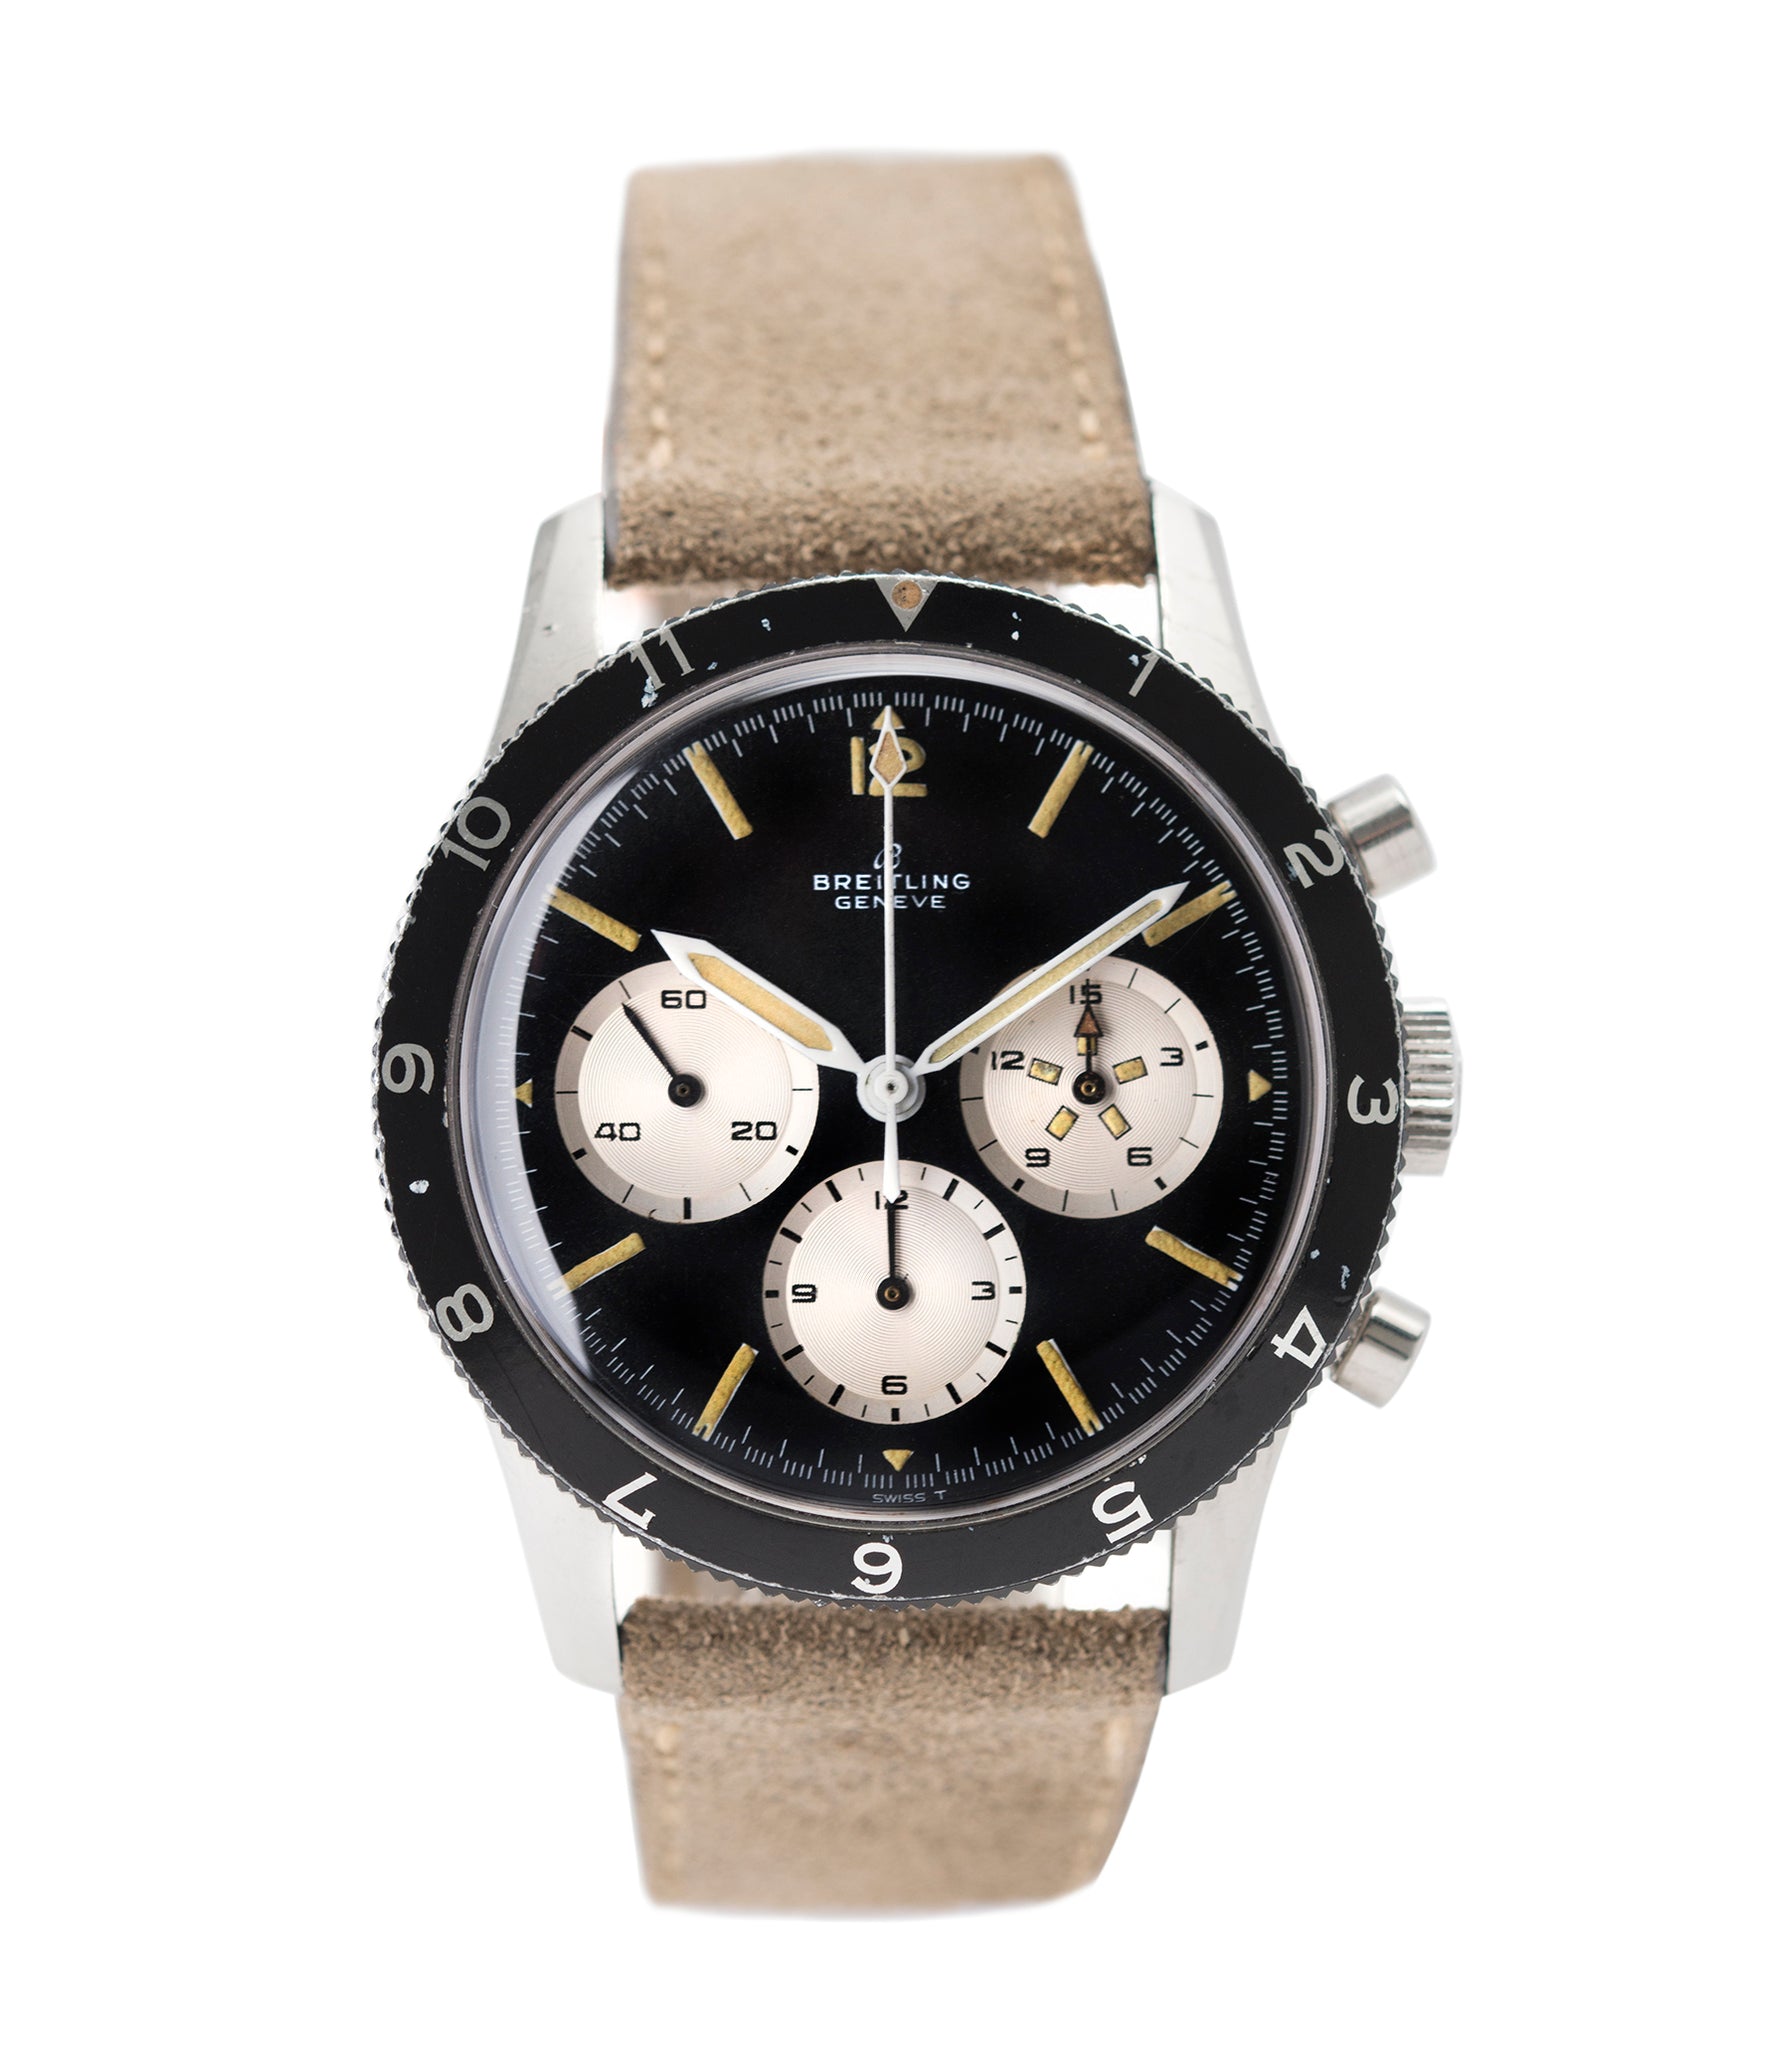 buy vintage Breitling 765 AVI pilot steel vintage chronograph watch online at A Collected Man London UK specialist of rare vintage watches